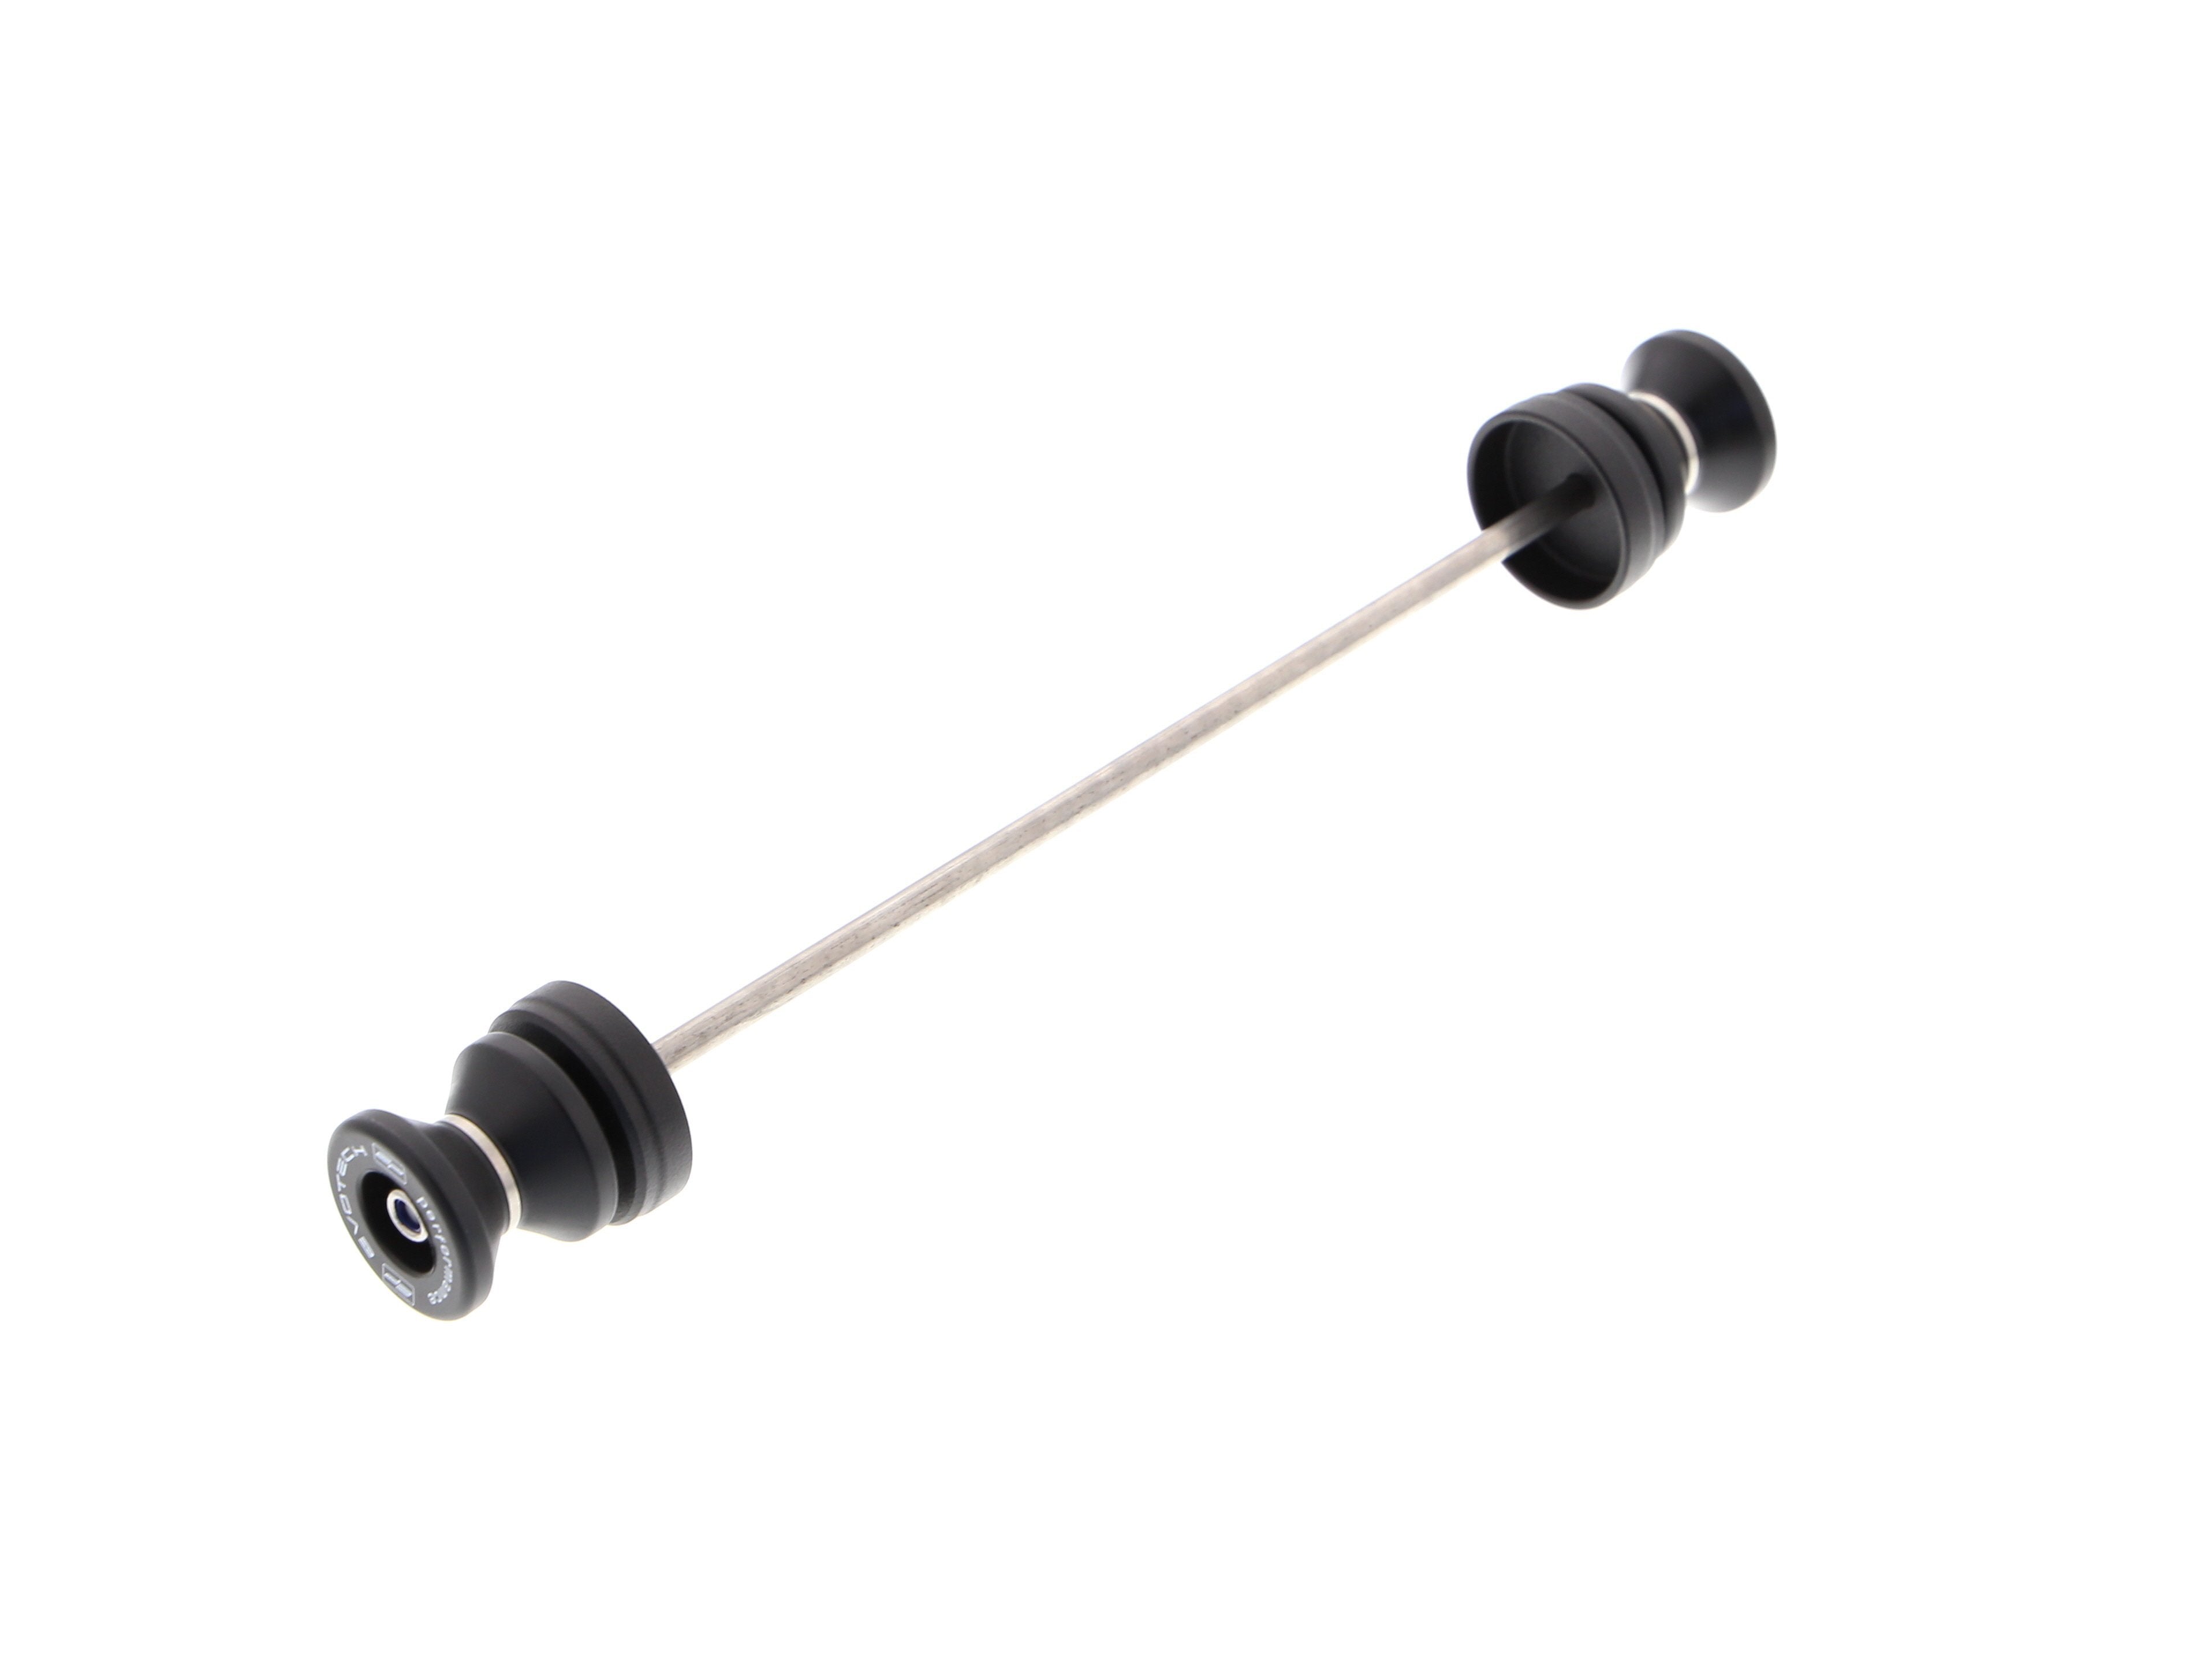 EP Paddock Stand Bobbins for the Ducati Scrambler Icon comprises a spindle rod with EPâs signature nylon paddock stand bobbins either end with precision shaped aluminium spacer.